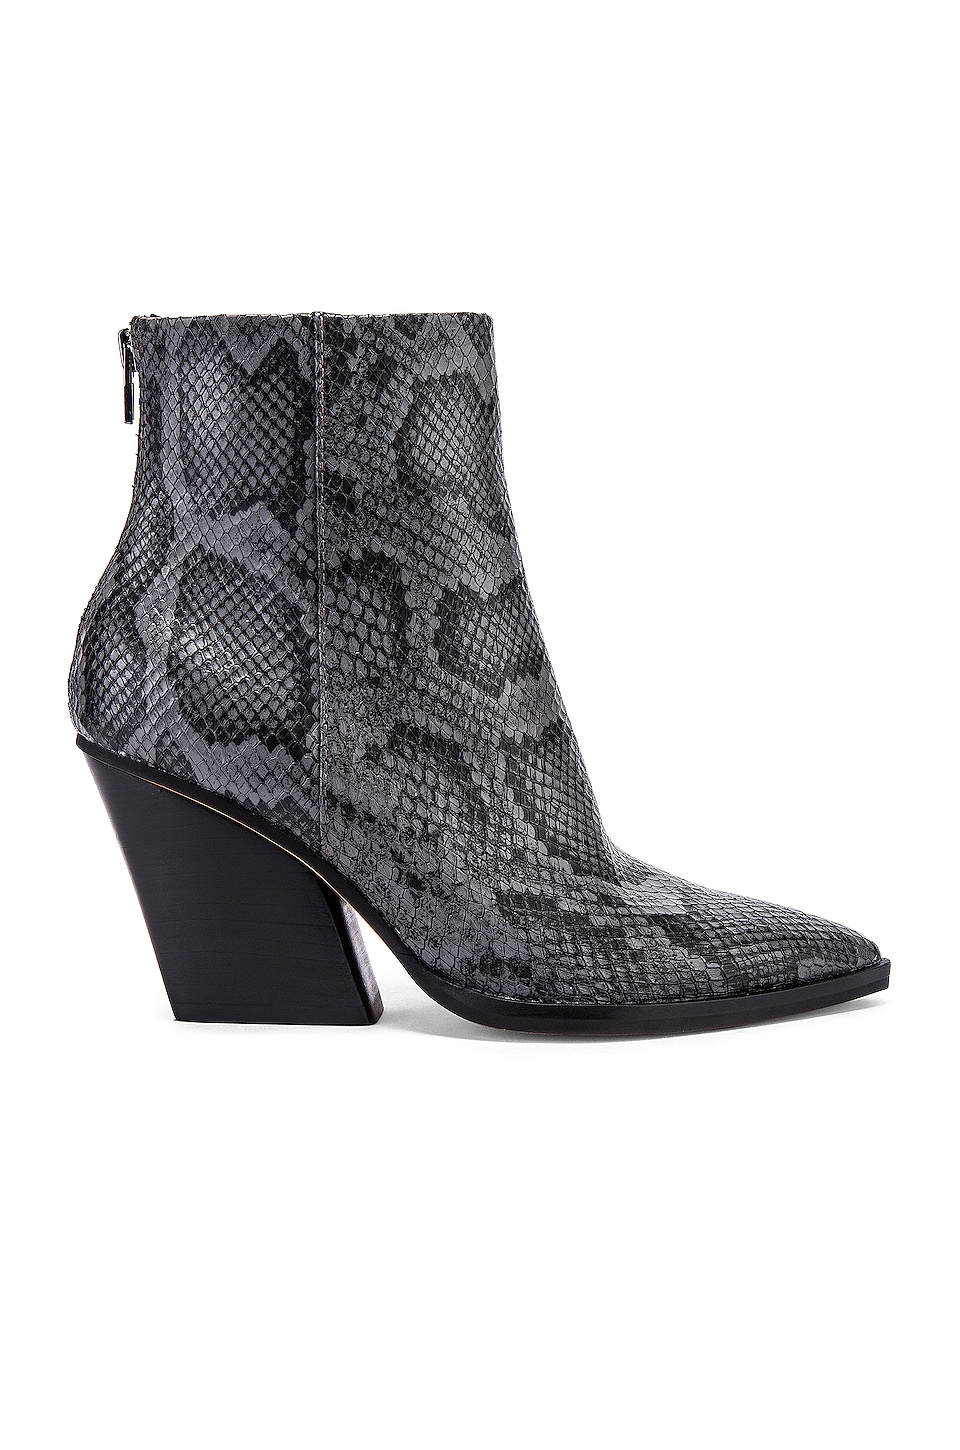 Dolce Vita Issa Bootie in Charcoal 